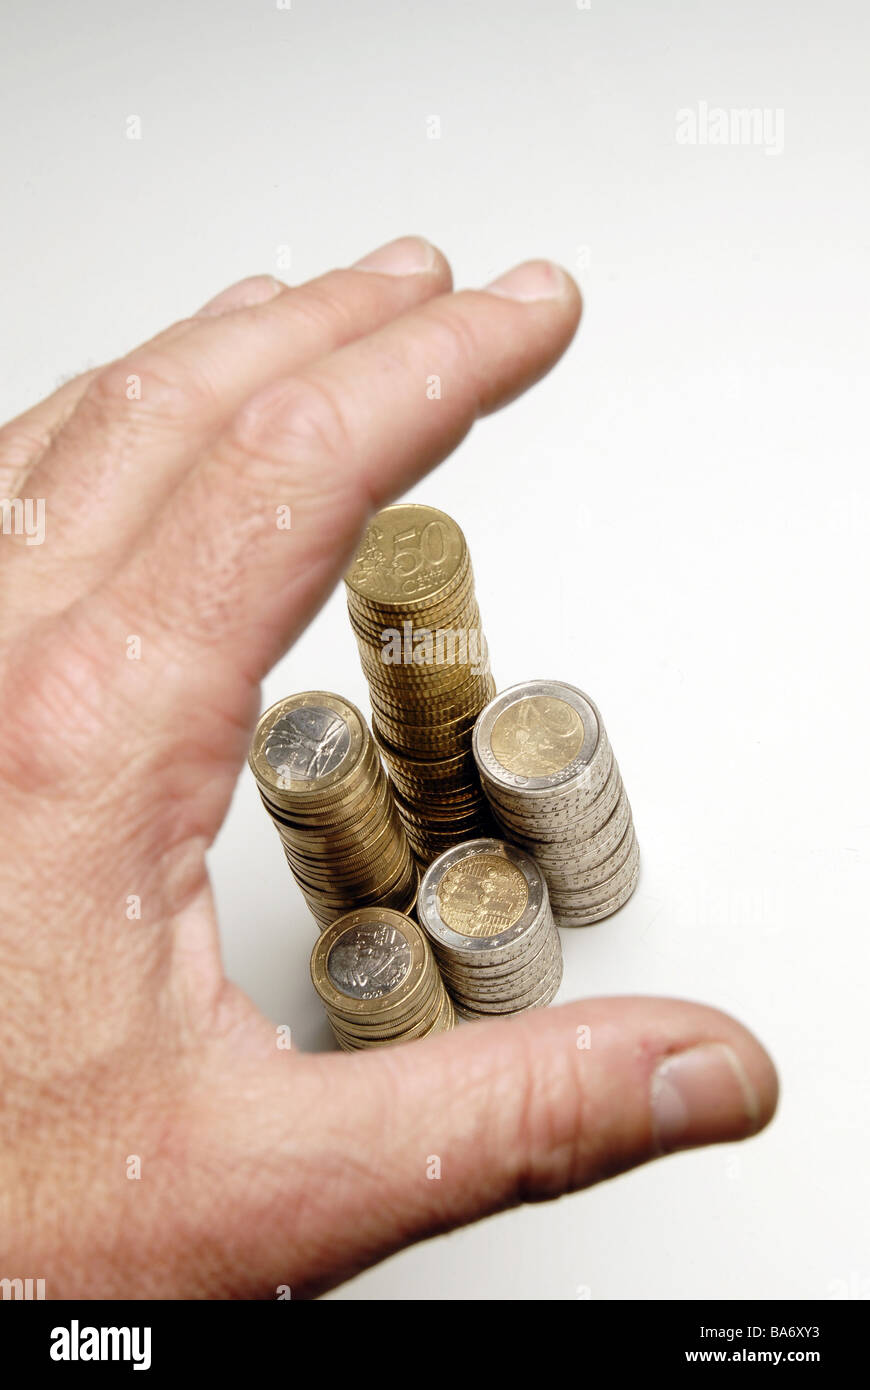 Euro-coins stacked men's-hand detail people man hand money Euro coins value differently counted counts sorts finances economy Stock Photo